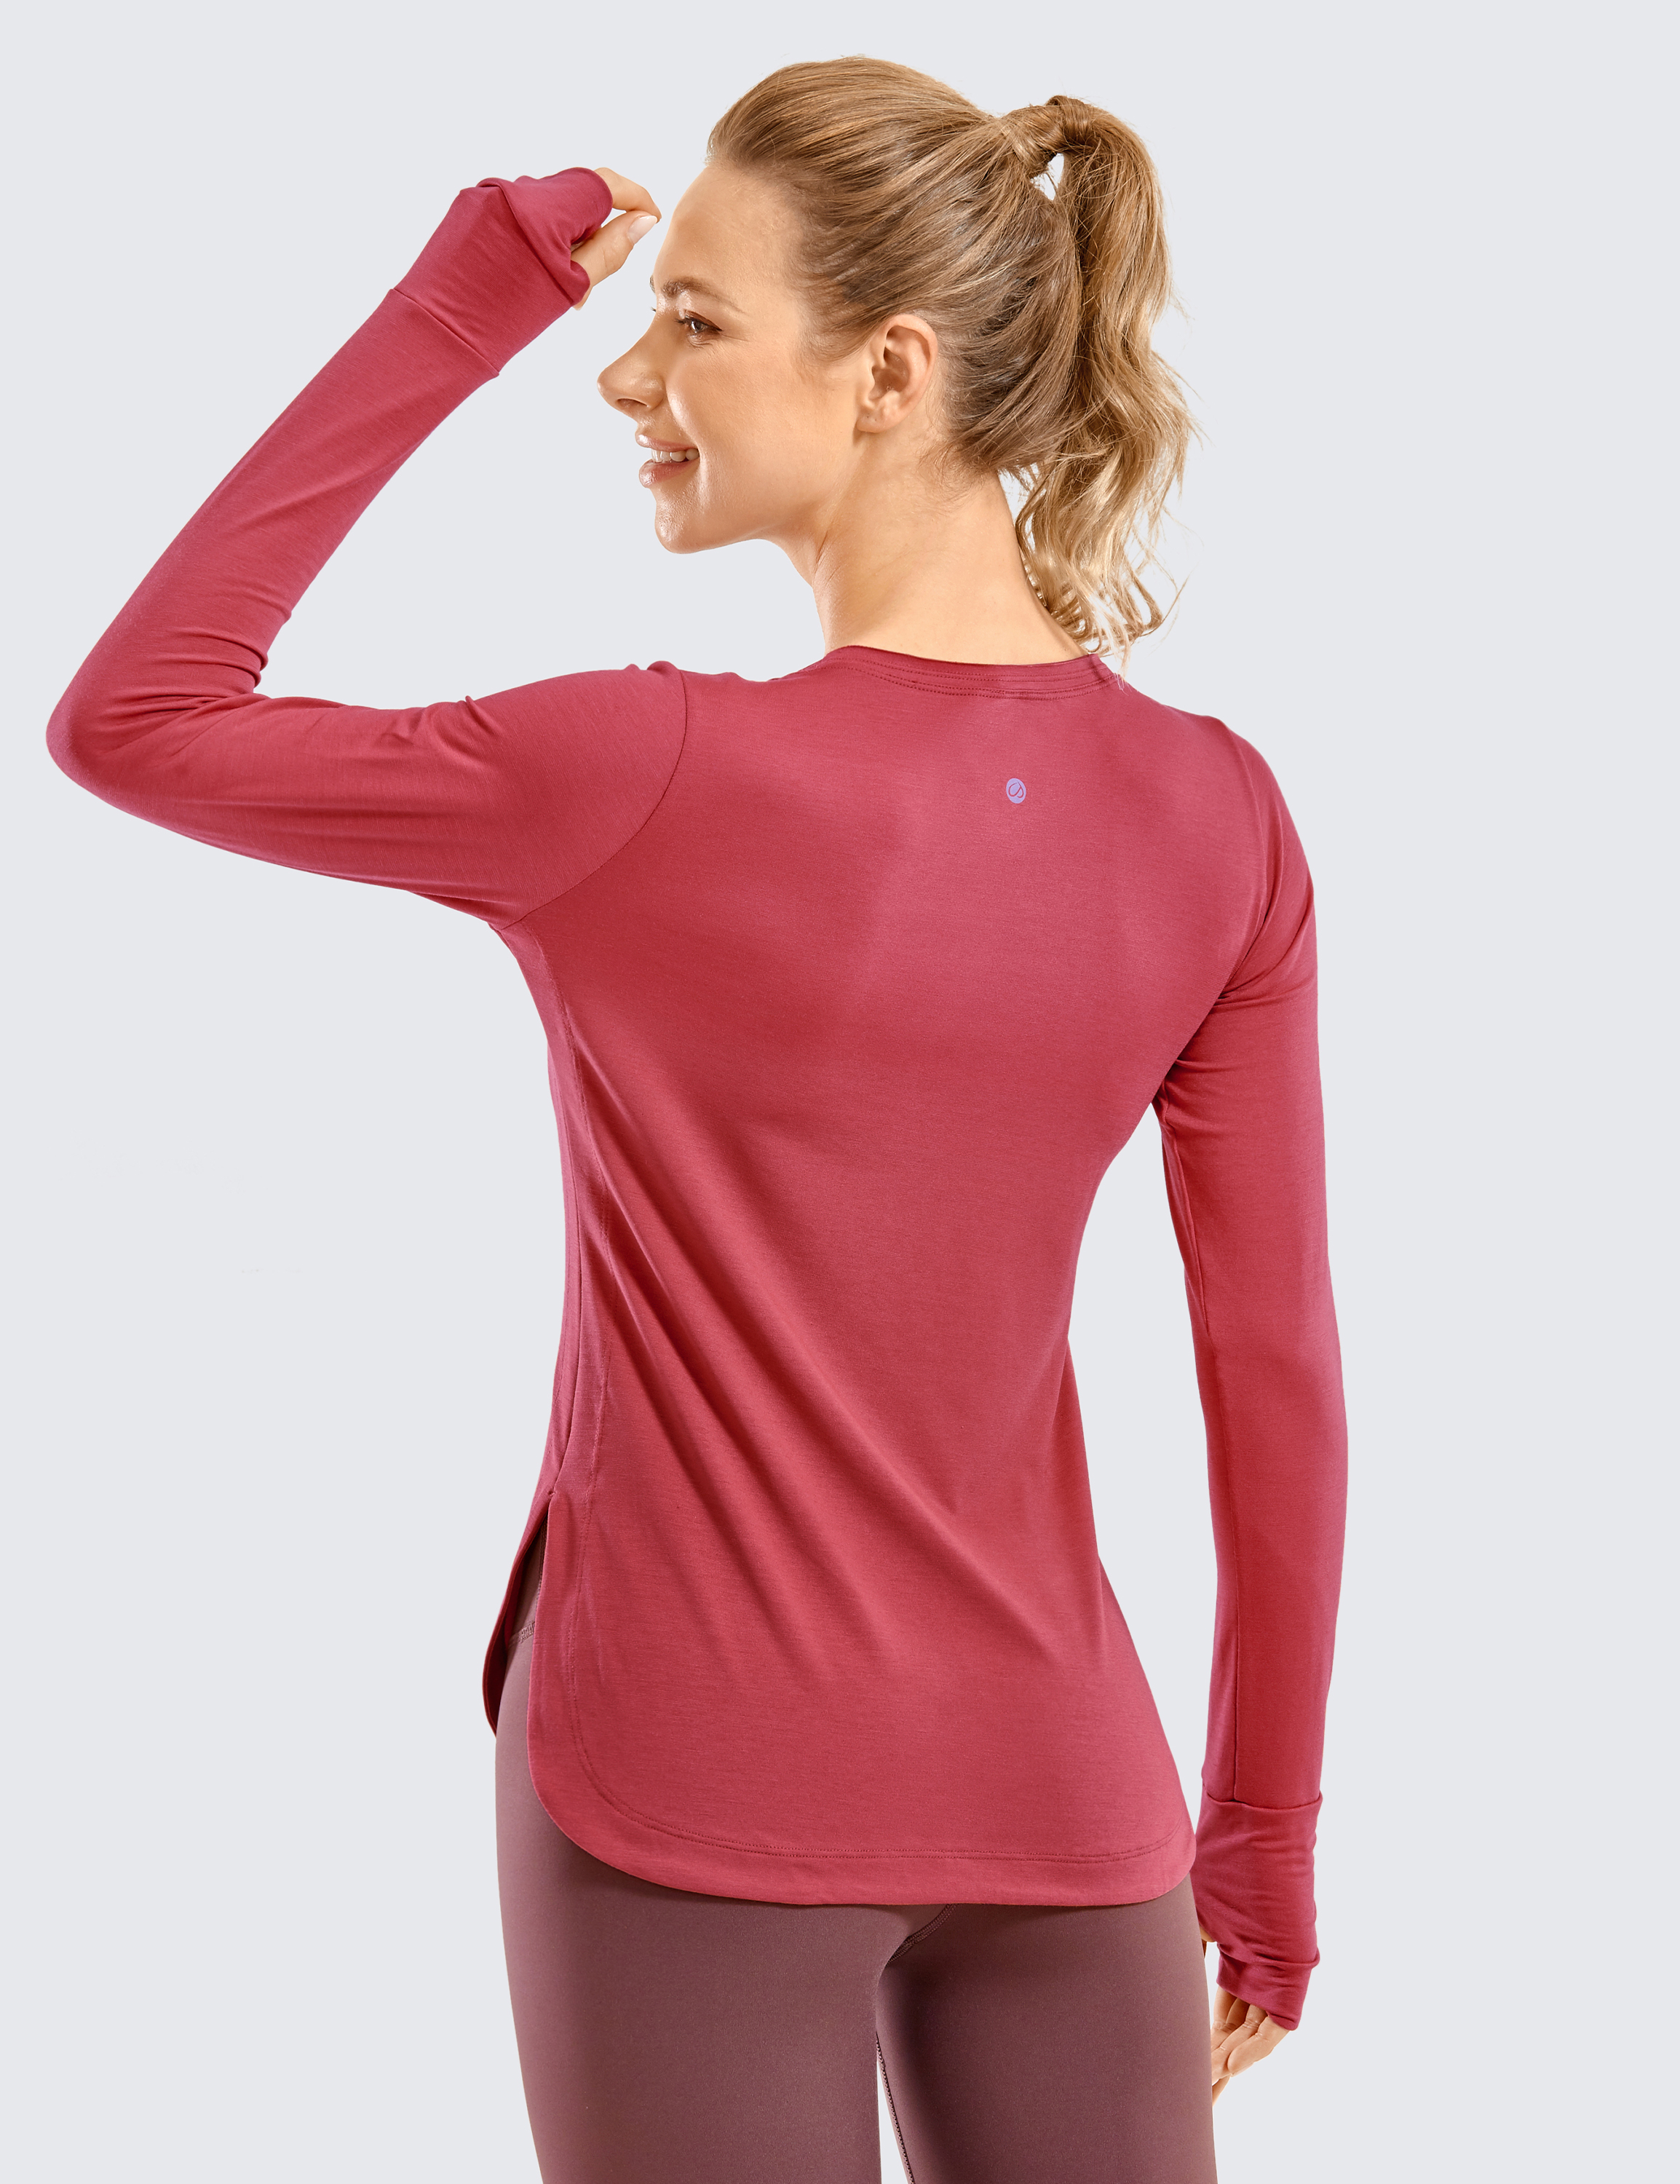 Stretch Long Sleeve Yoga Shirts Workout Activewear Tops Stretch  Quick-Drying Athletic Sports Thumbhole TShirts Blouse for Women Mesh Hollow  Gym